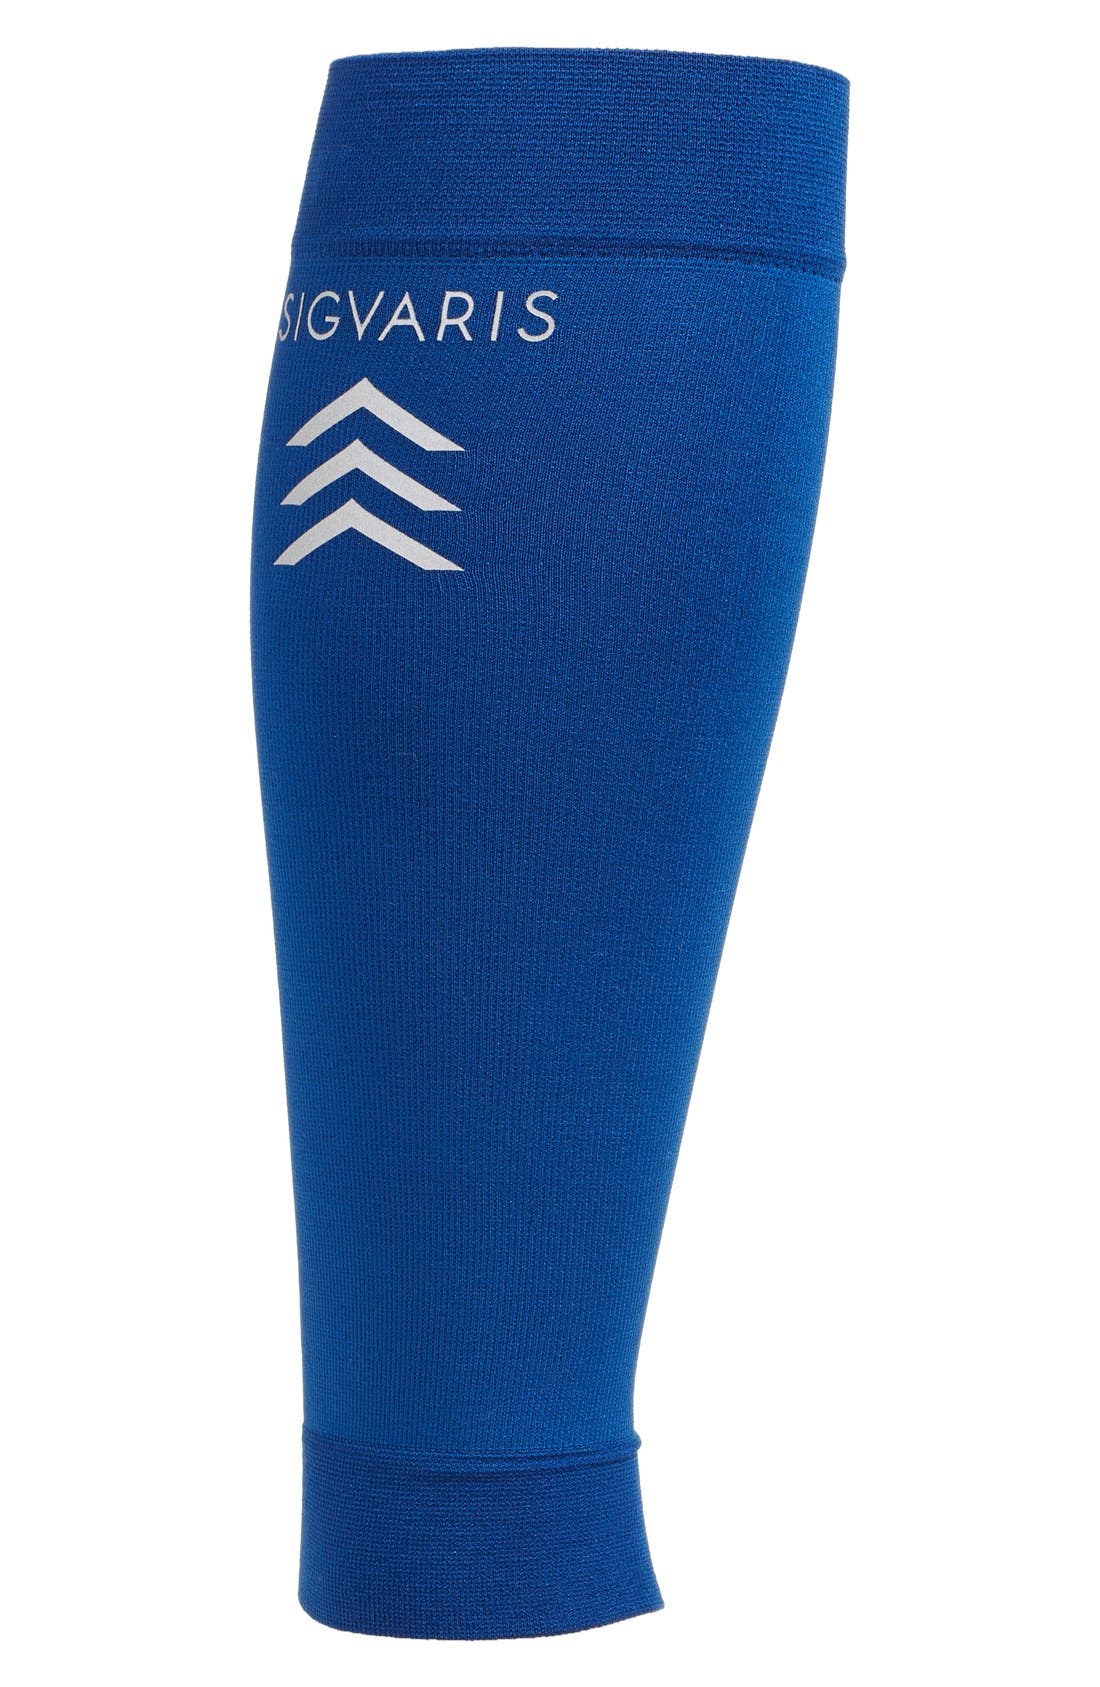 UPC 745129216917 product image for Men's Insignia By Sigvaris 'Sports' Graduated Compression Performance Calf Sleev | upcitemdb.com